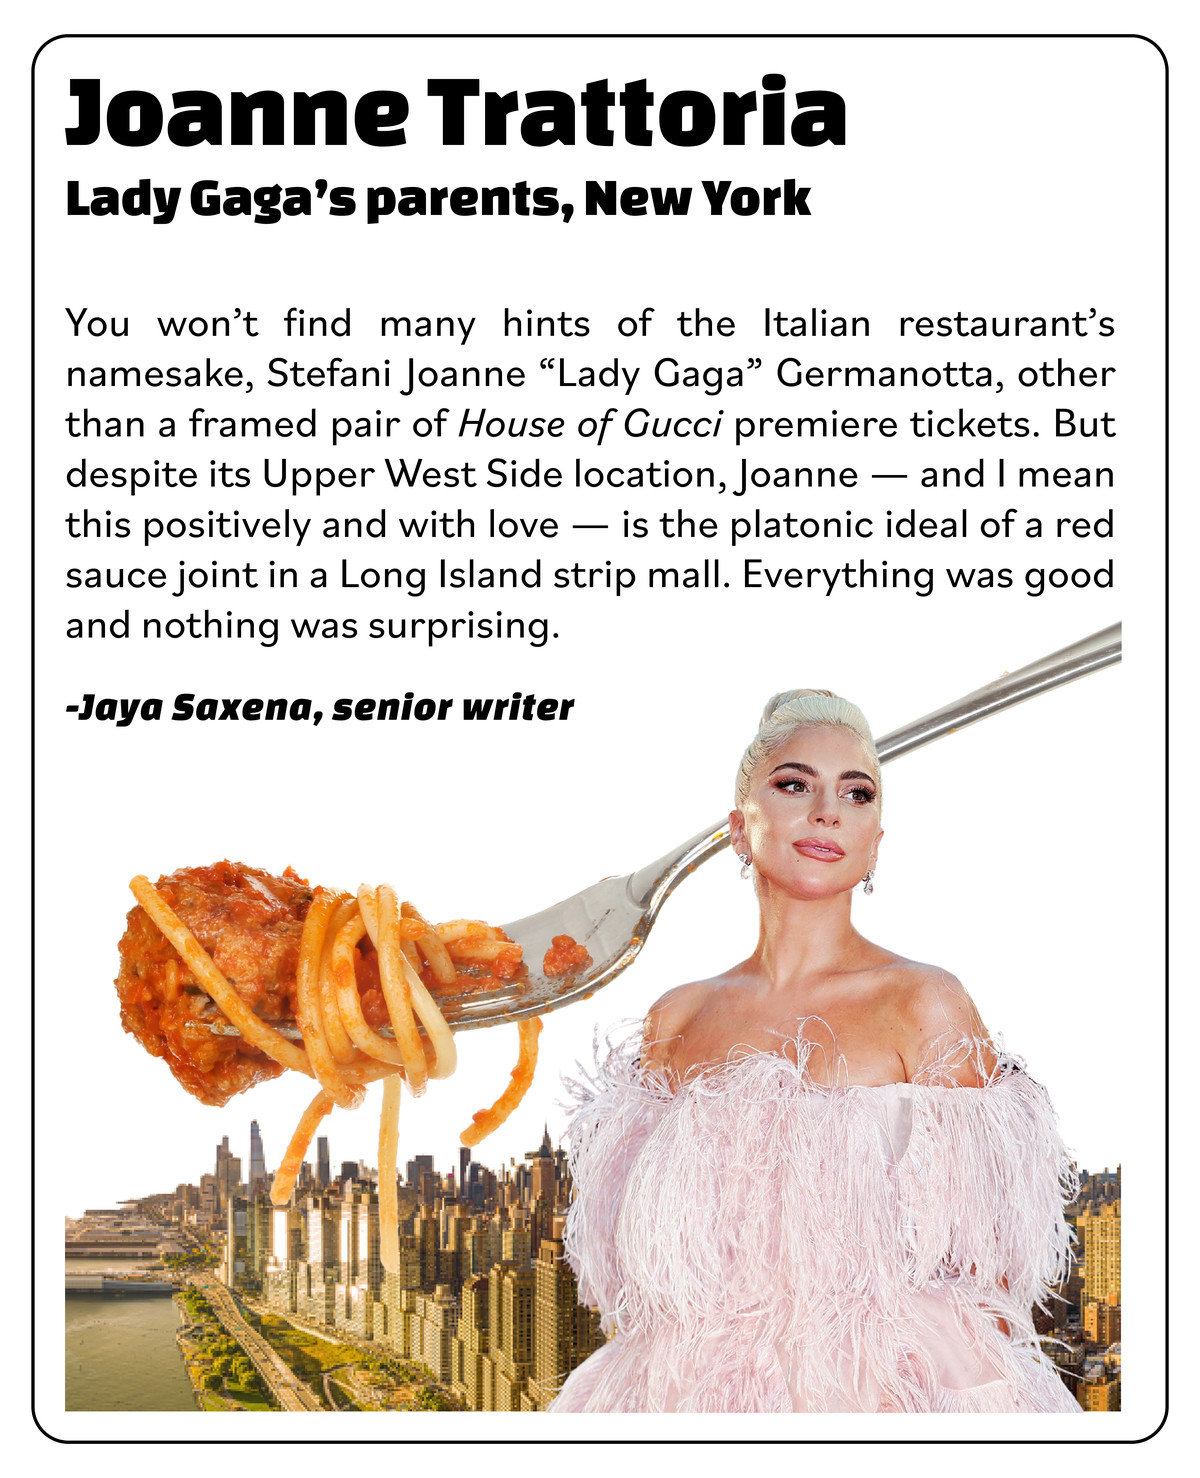 Sidebar review of Joanne Trattoria, owned by Lady Gaga’s parents, NYC: “You won’t find many hints of the restaurant’s namesake, Stefani Joanne ‘Lady Gaga’ Germanotta, other than a framed pair of ‘House of Gucci’ premiere tickets. Despite its Upper West Side location, Joanne — and I mean this positively and with love — is the platonic ideal of a red sauce joint in a Long Island strip mall. Everything was good and nothing was surprising.”